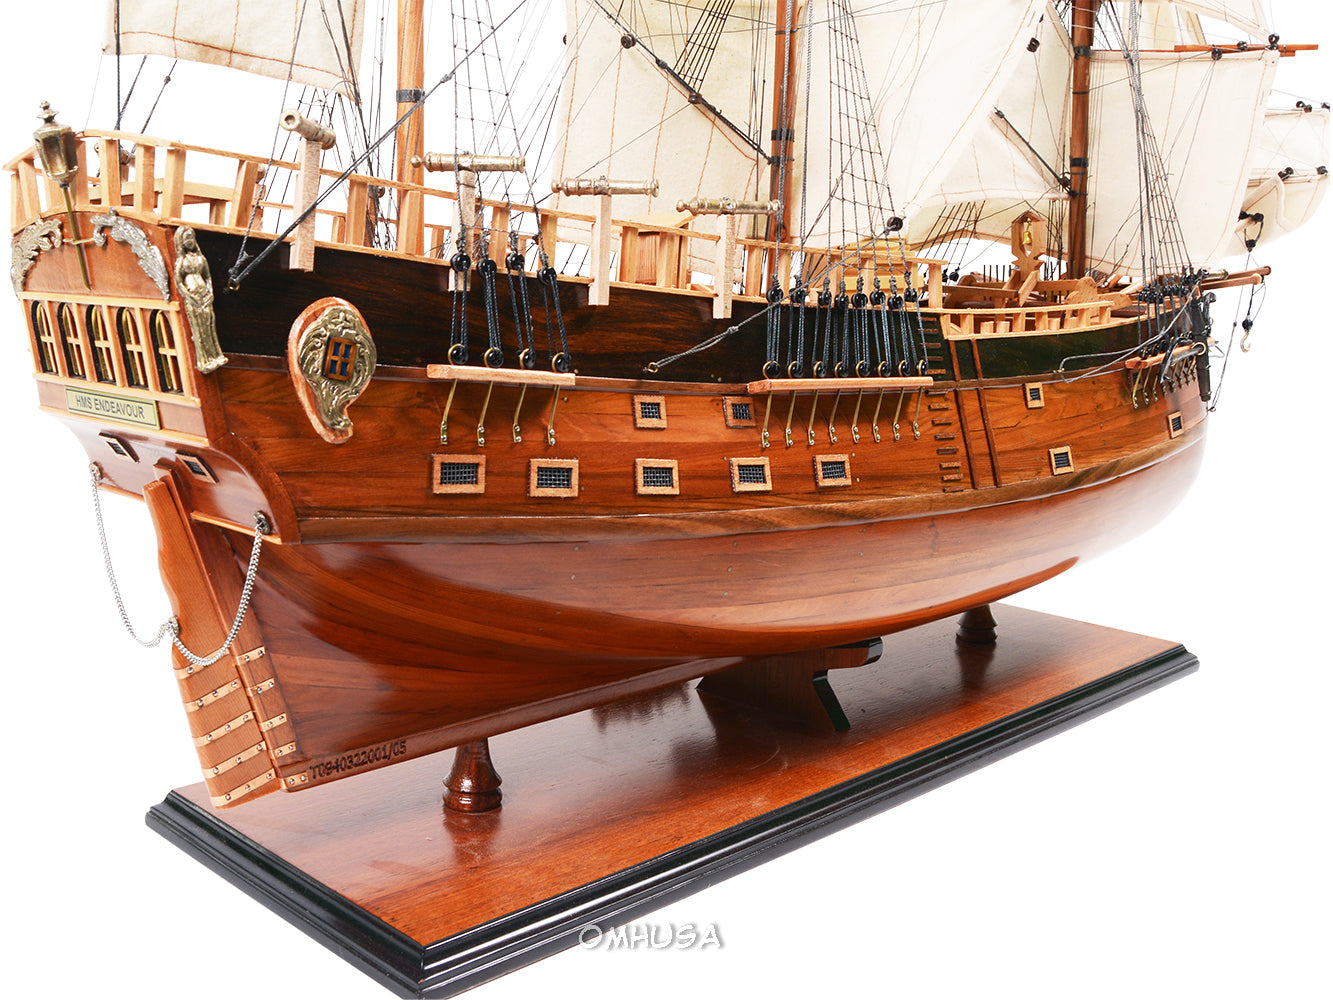 Aldo Hobbies & Creative Arts> Collectibles> Scale Model new / Wood / L: 38 W: 13 H: 32 Inches HMS  Endeavour British Royal Navy James Cook Tall Ship Large Wood Model Sailboat Assembled